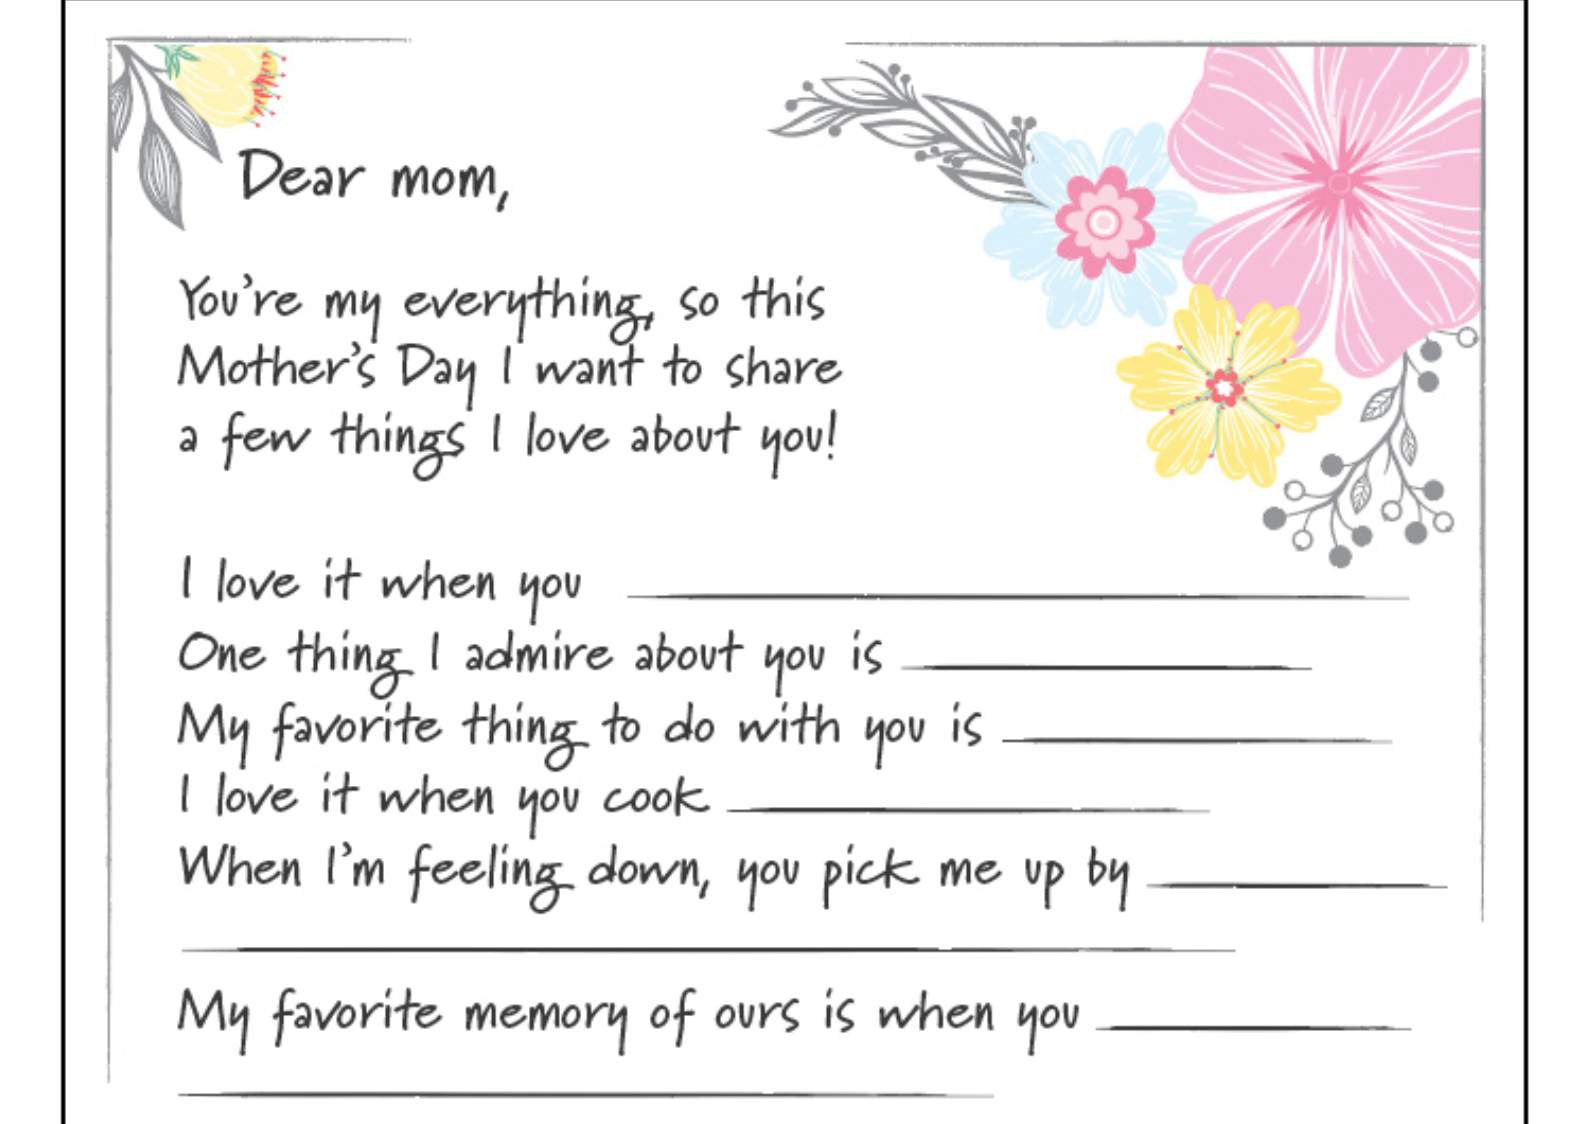 You Can Thank Your Mom With This Diy Mothers Day Card 